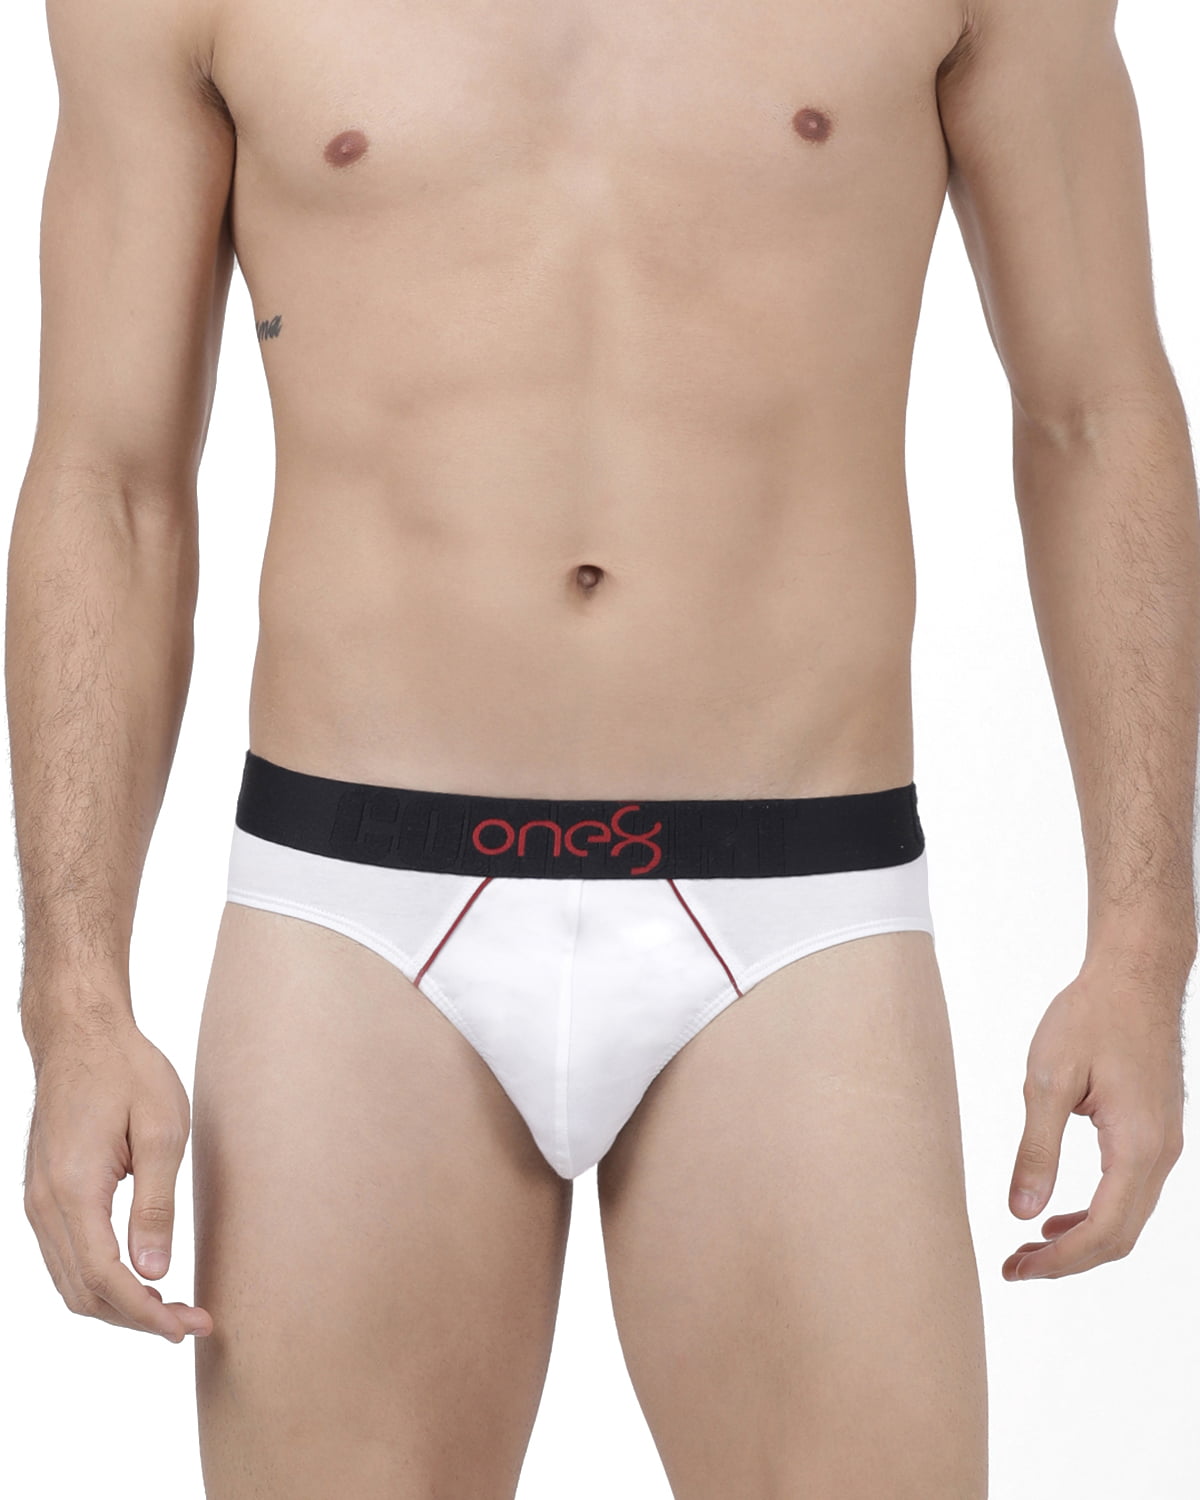 LOW RISE BRIEF - WHITE